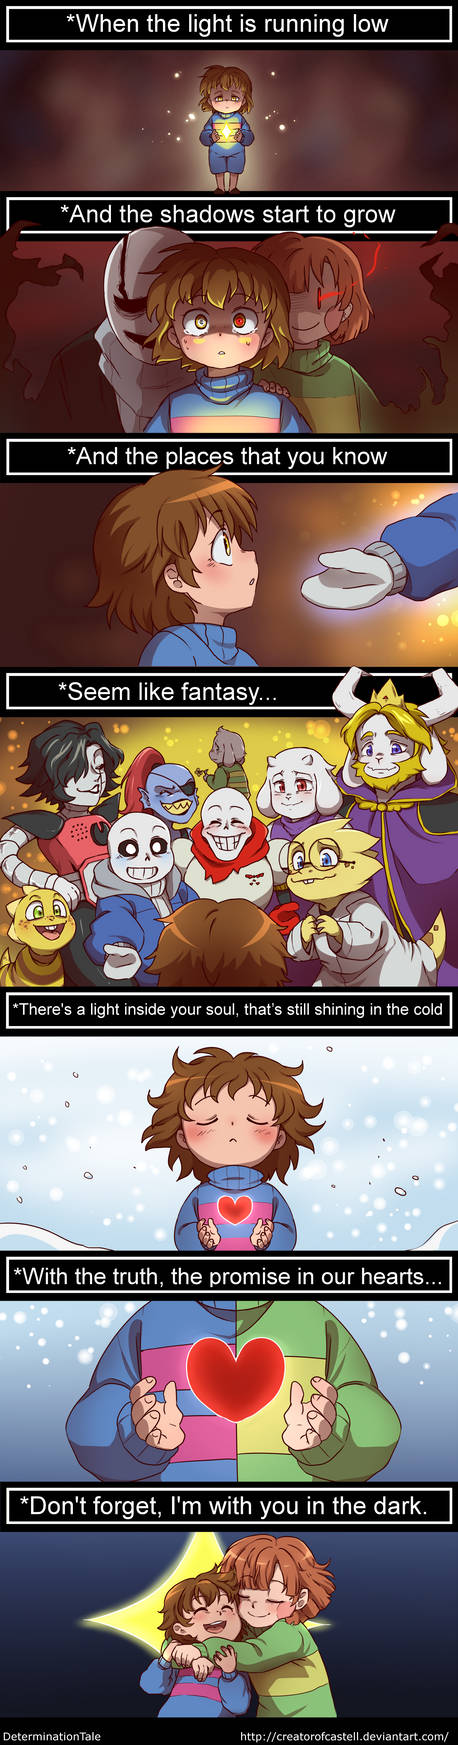 Undertale: Will of determination by TheKris- - Play Online - Game Jolt